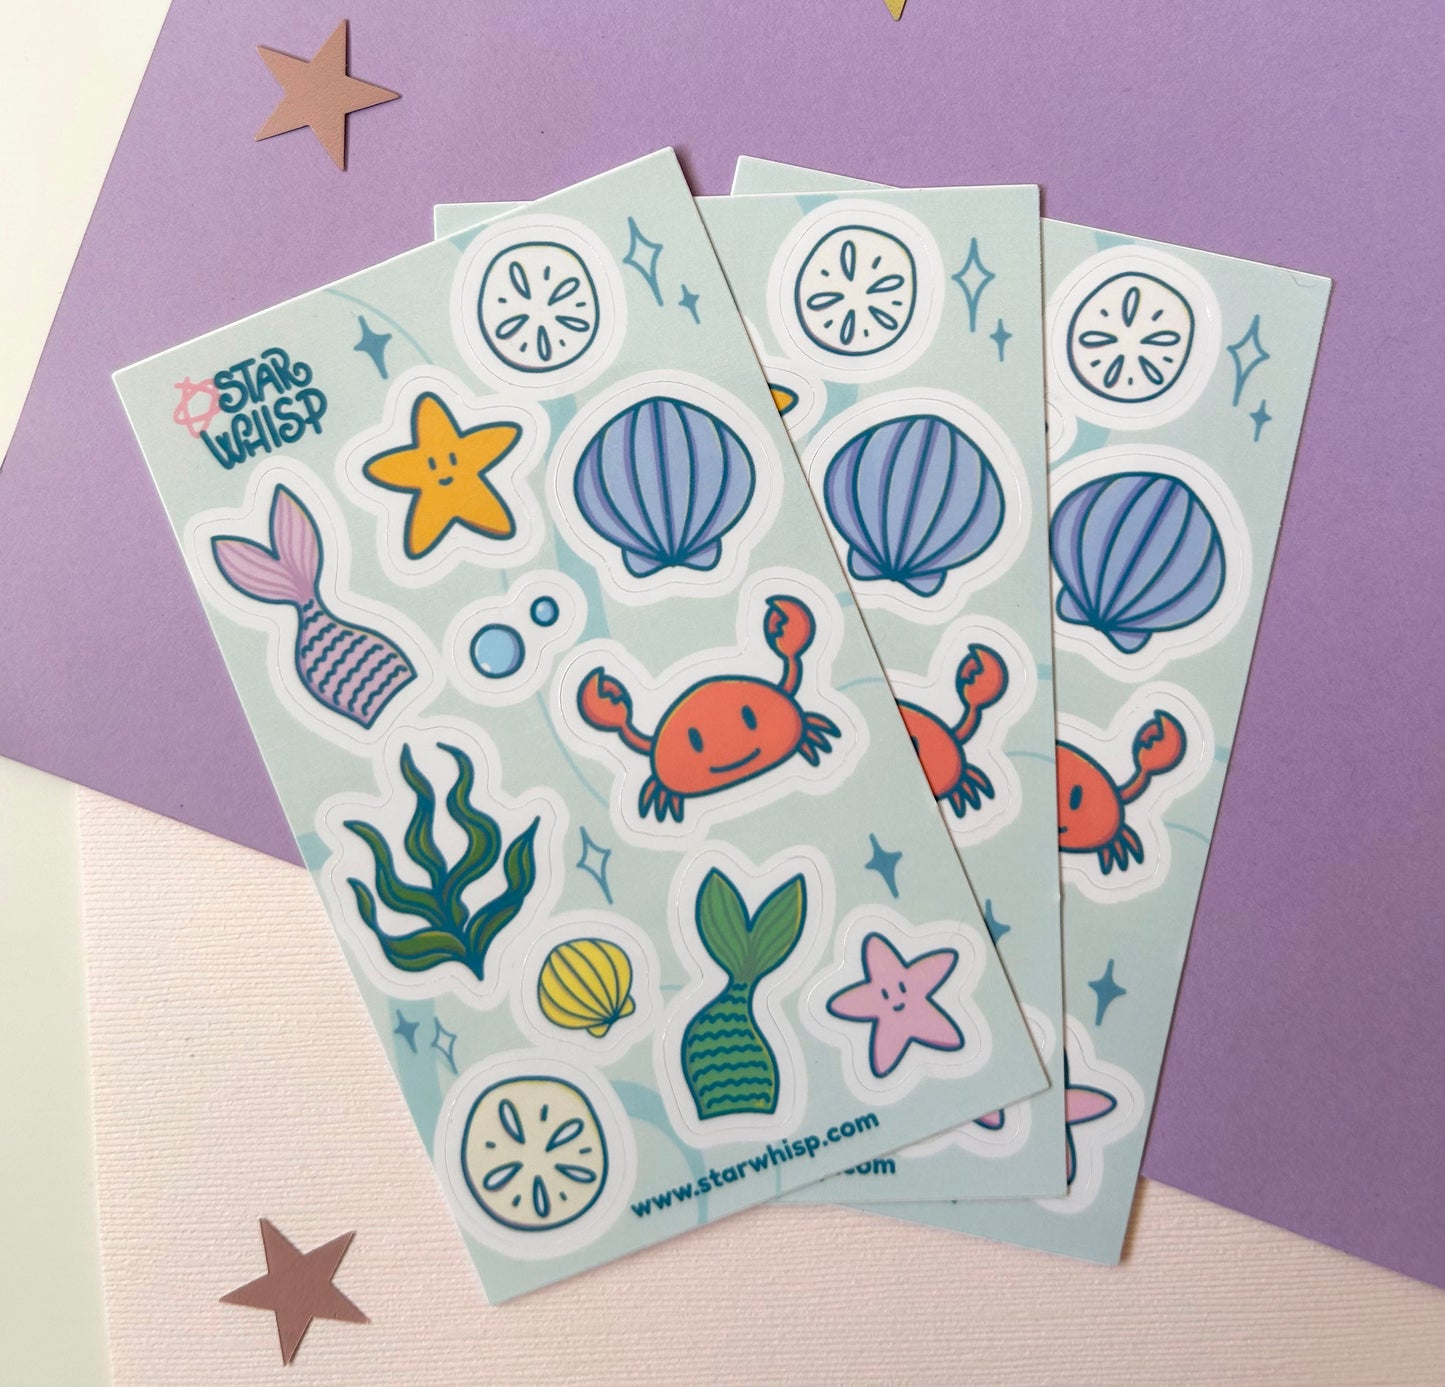 Mermaid Tails and Sea Friends Sticker Sheet, Planner Stickers, Journal Stickers